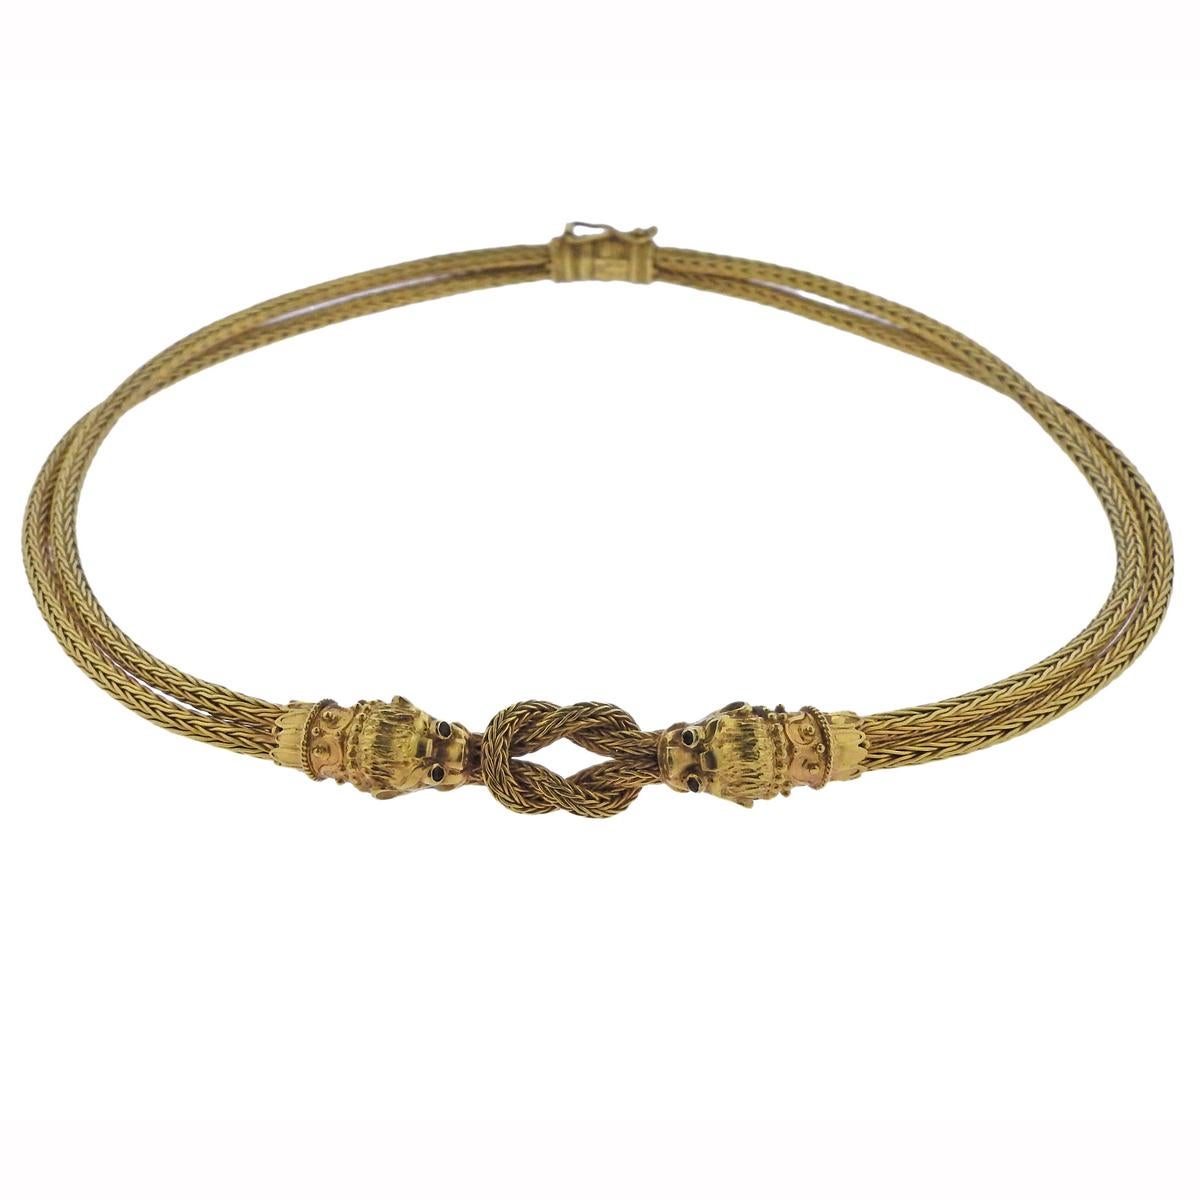 18k yellow gold necklace, featuring two chimera heads, interlocked with a Hercules knot. Decorated with ruby eyes, designed by Greek jewelry maker Ilias Lalaounis. Necklace is 15.75